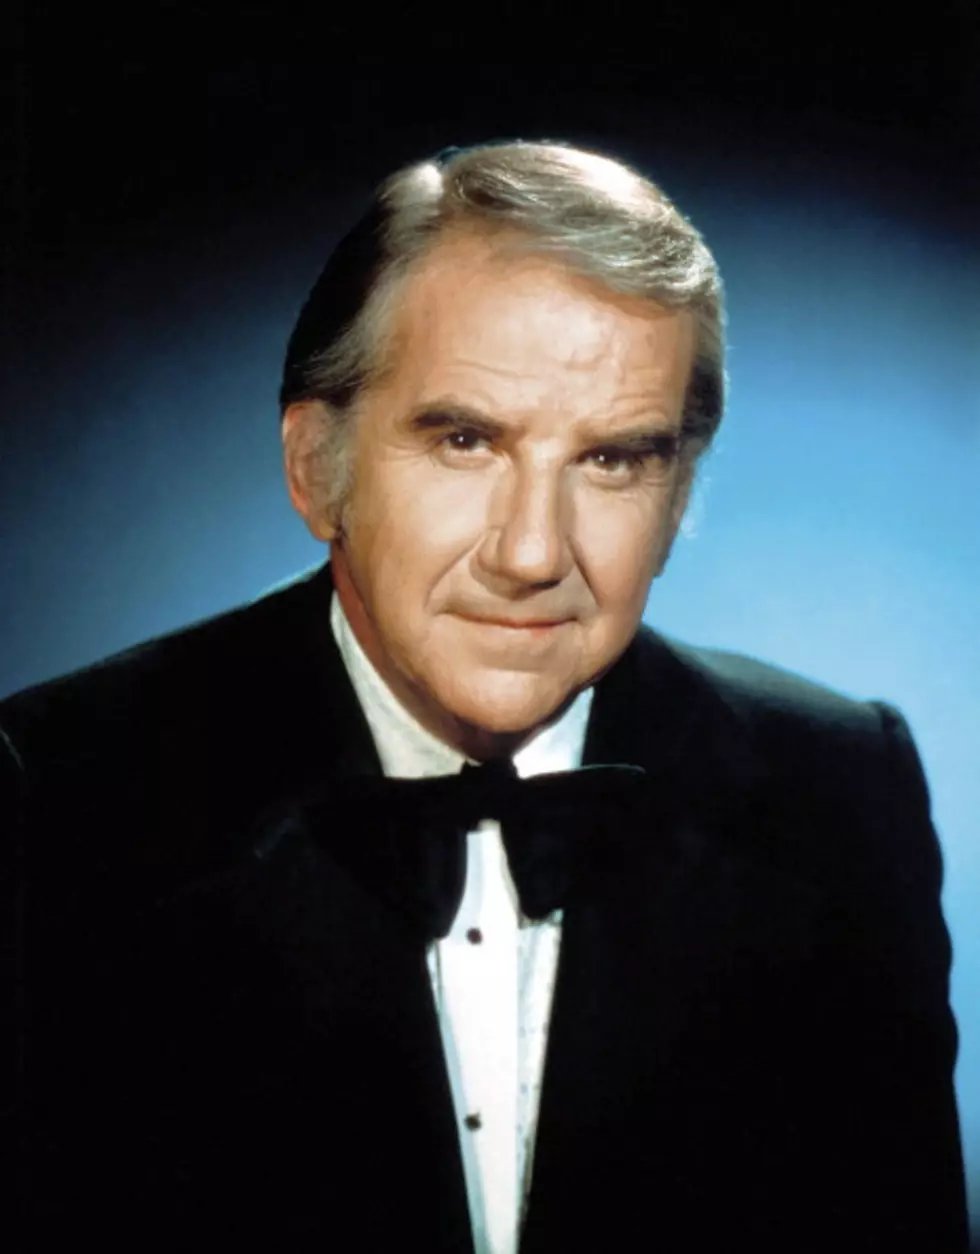 This Just Popped Into My Head&#8230; &#8220;Is Ed McMahon Dead?&#8221;